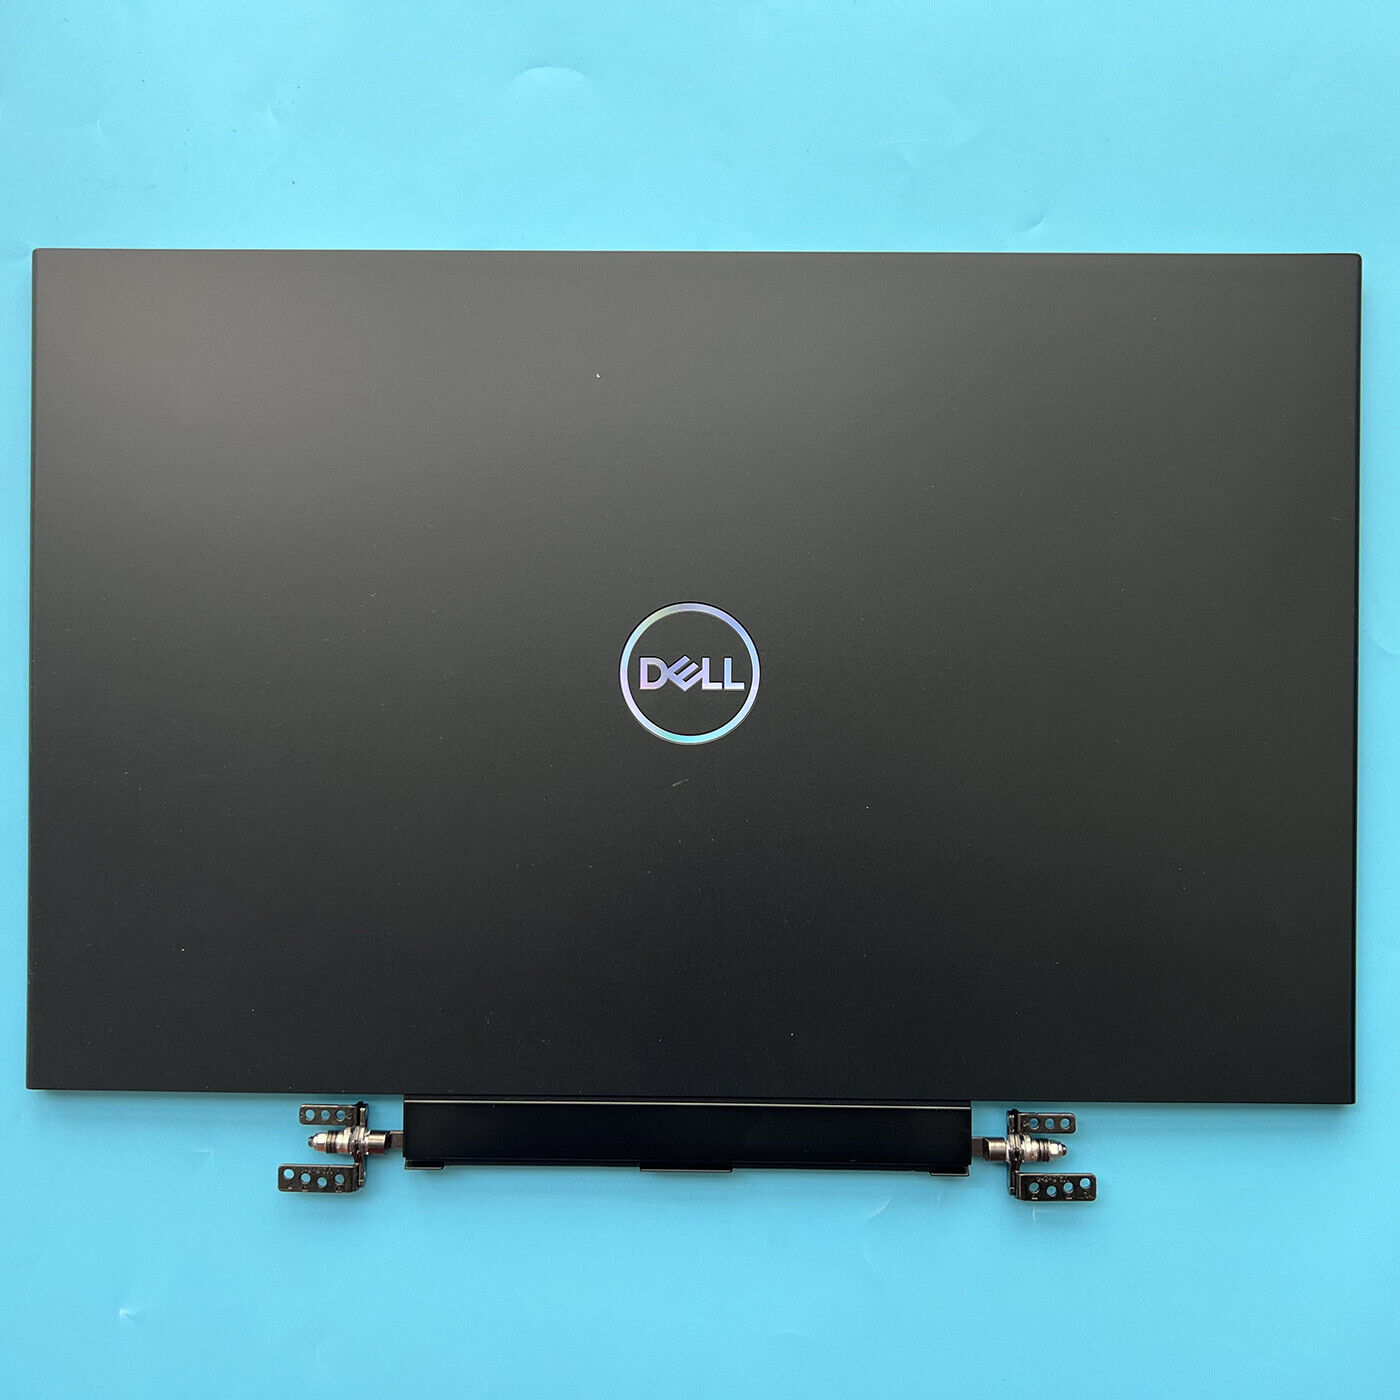 New Rear Lid Top Back Cover Case + Front Bezel + Hinges For Dell G7 7700 